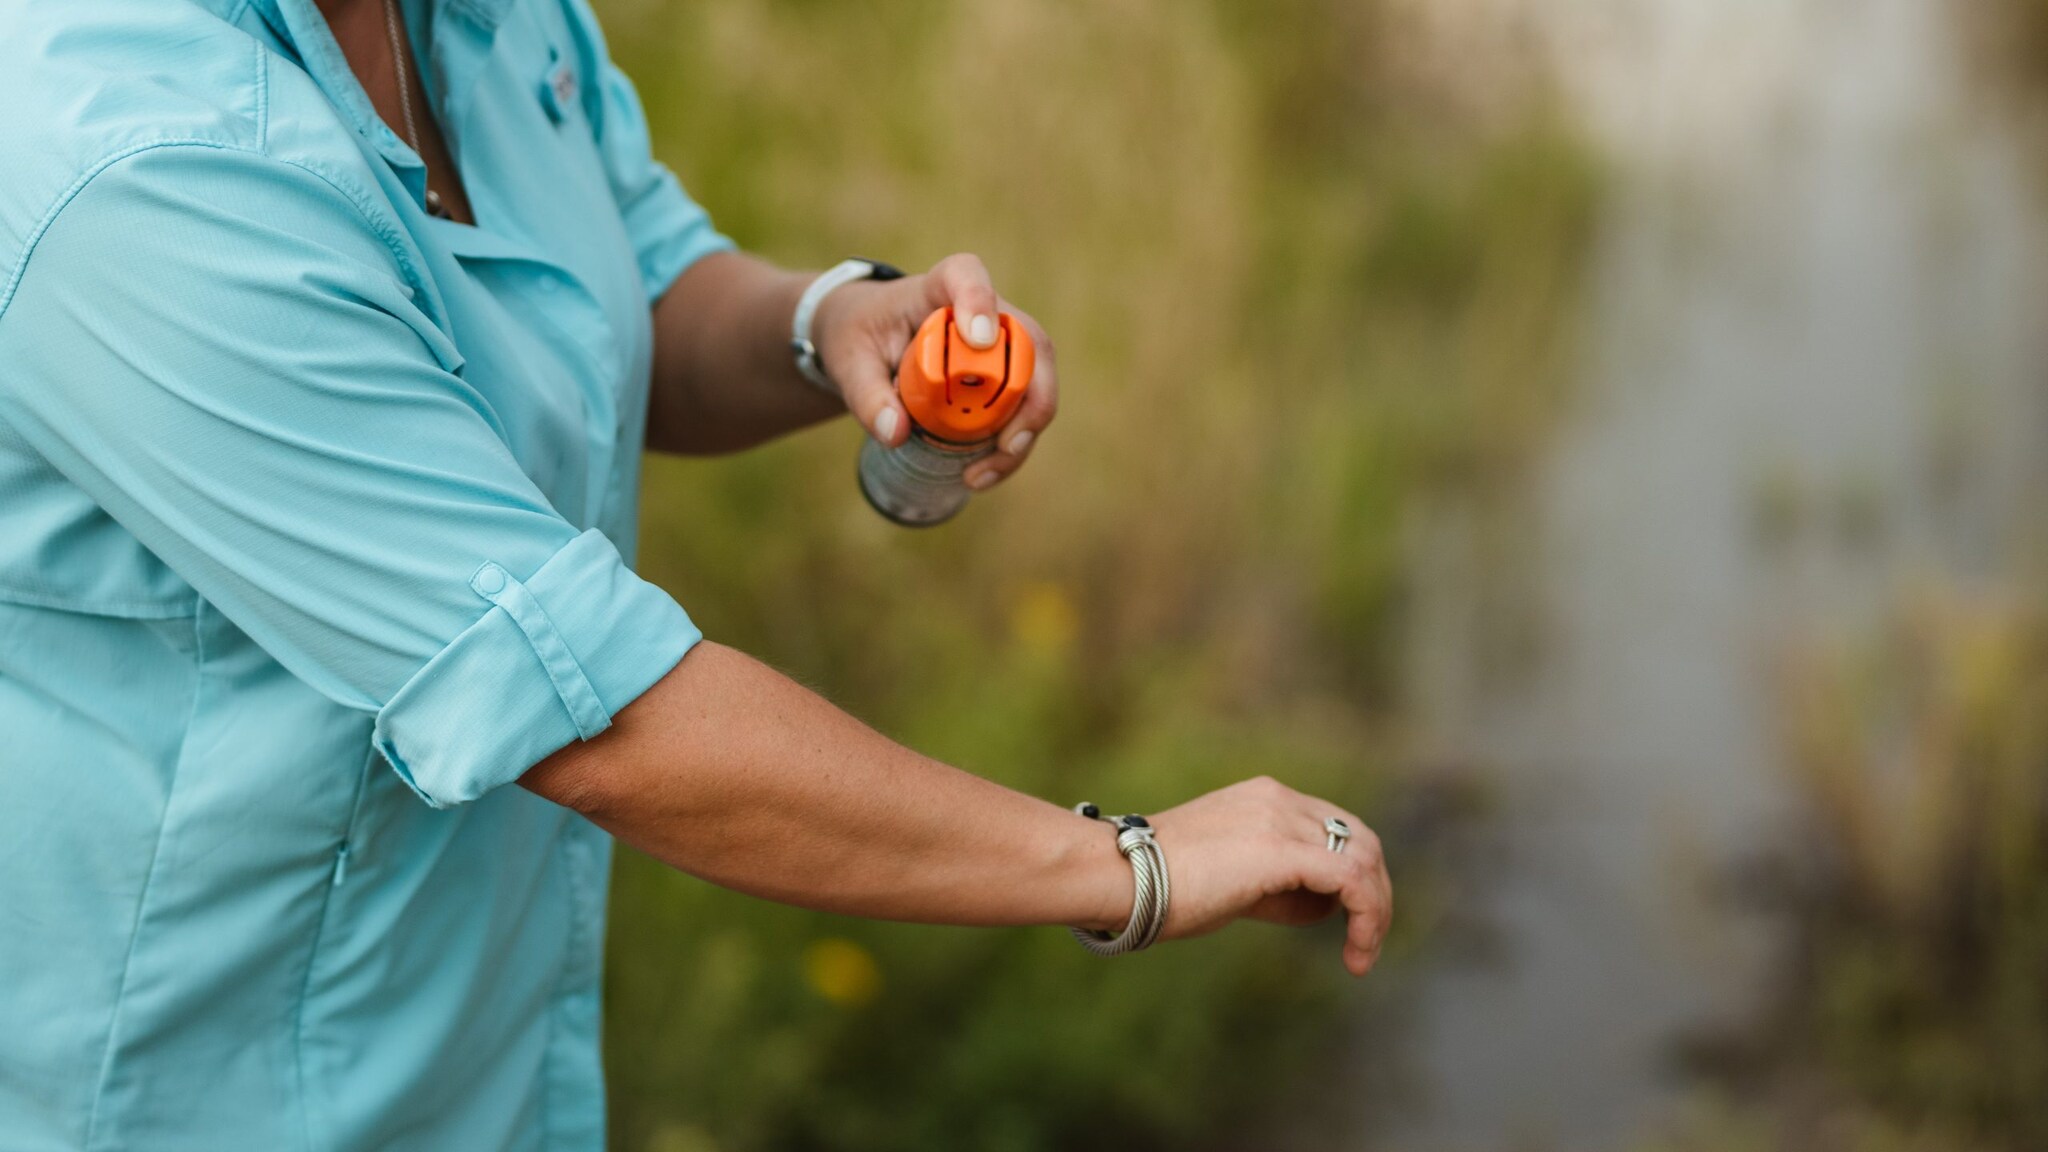 Woman applying insect repellant on her arm.